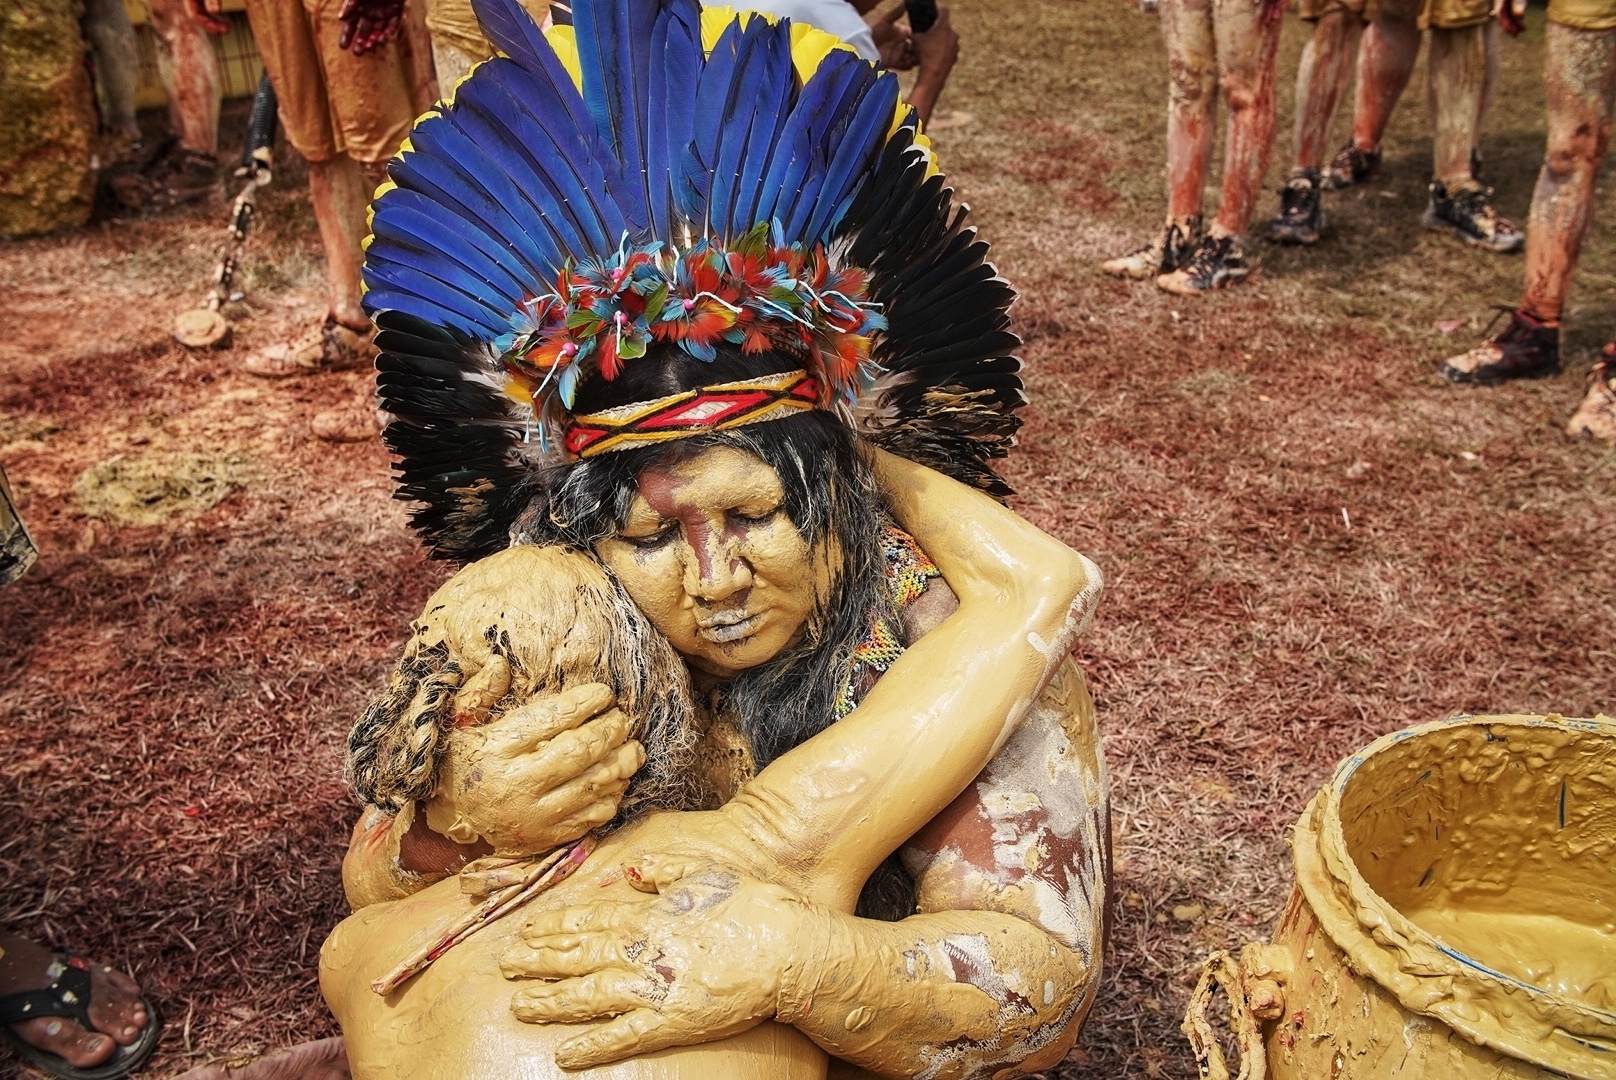 Two people embrace while seated on the ground. Both their bodies are golden and one wears a traditional headdress.